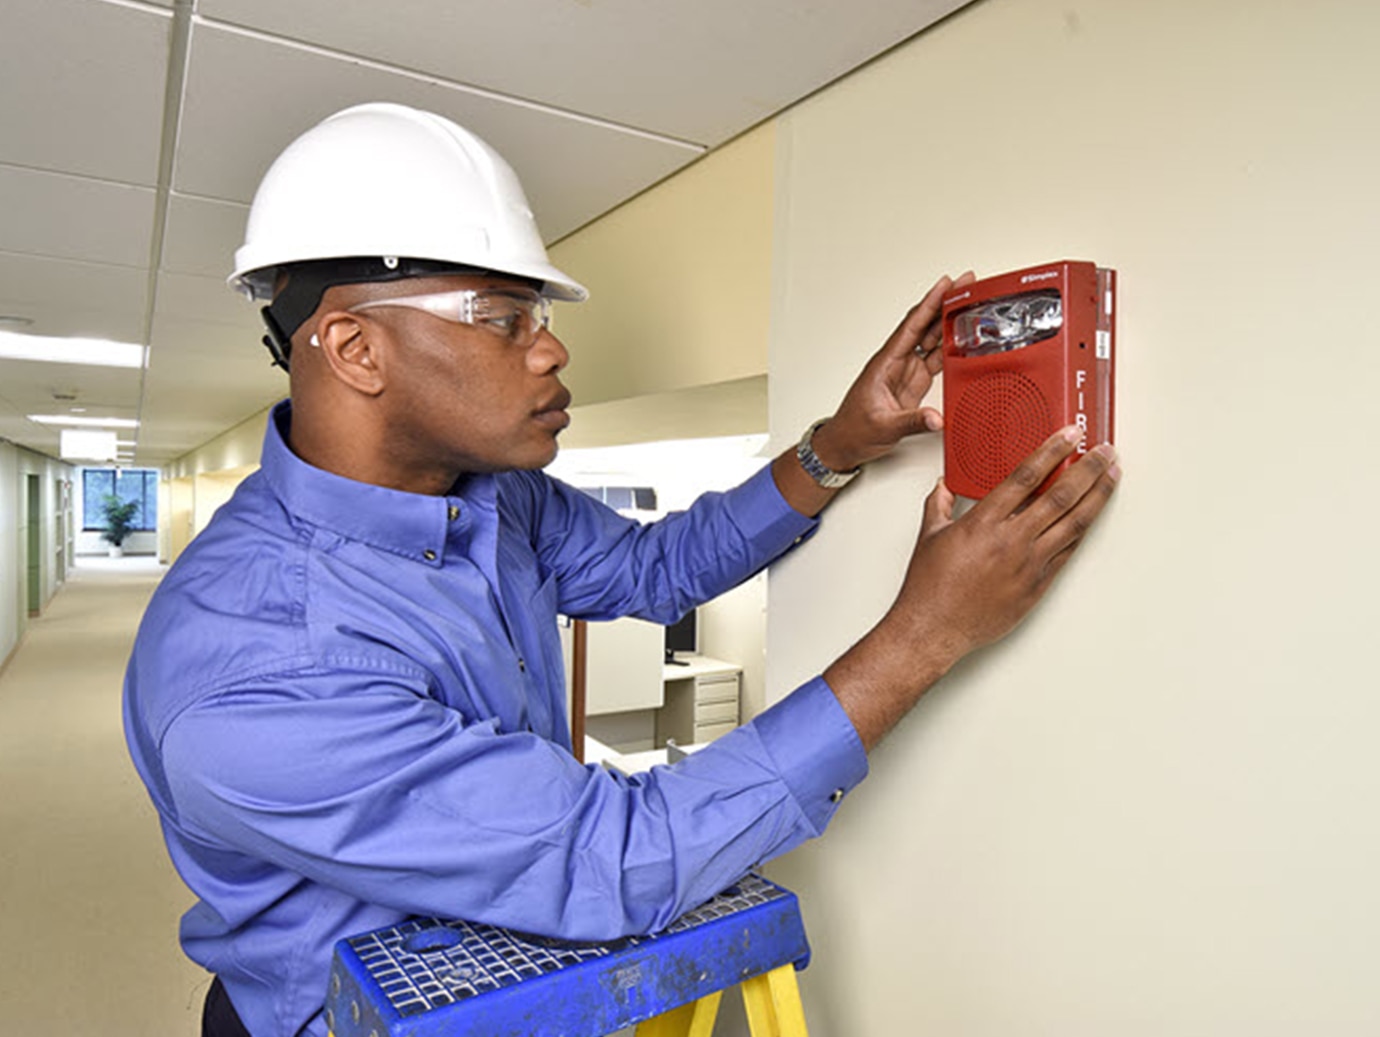 A person wearing a hard hat and holding a red speaker